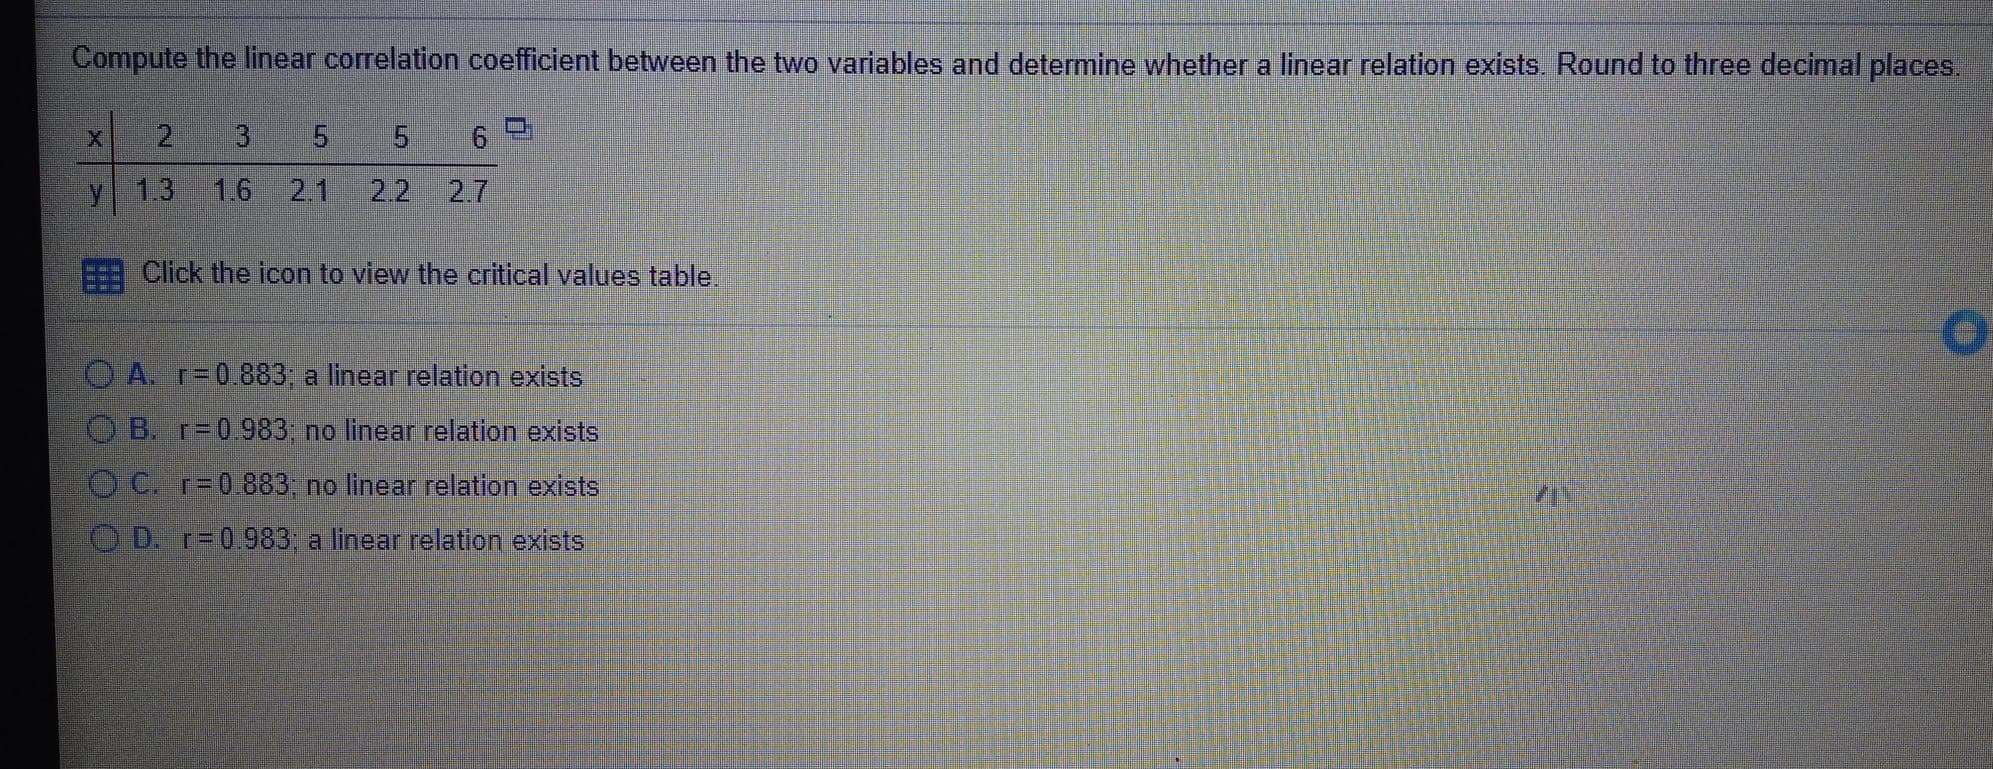 Compute the linear correlation coefficient between the two variables and determine whether a linear relation exists. Round to three decimal places.
5 5
y
1.3
1.6
2.1
2.2 2.7
Click the icon to view the critical values table.
O A. r=0.883; a linear relation exists
O B. r=0.983; no linear relation exists
O C. r=0.883; no linear relation exists
O D. r=0.983; a linear relation exists
3.
2.
